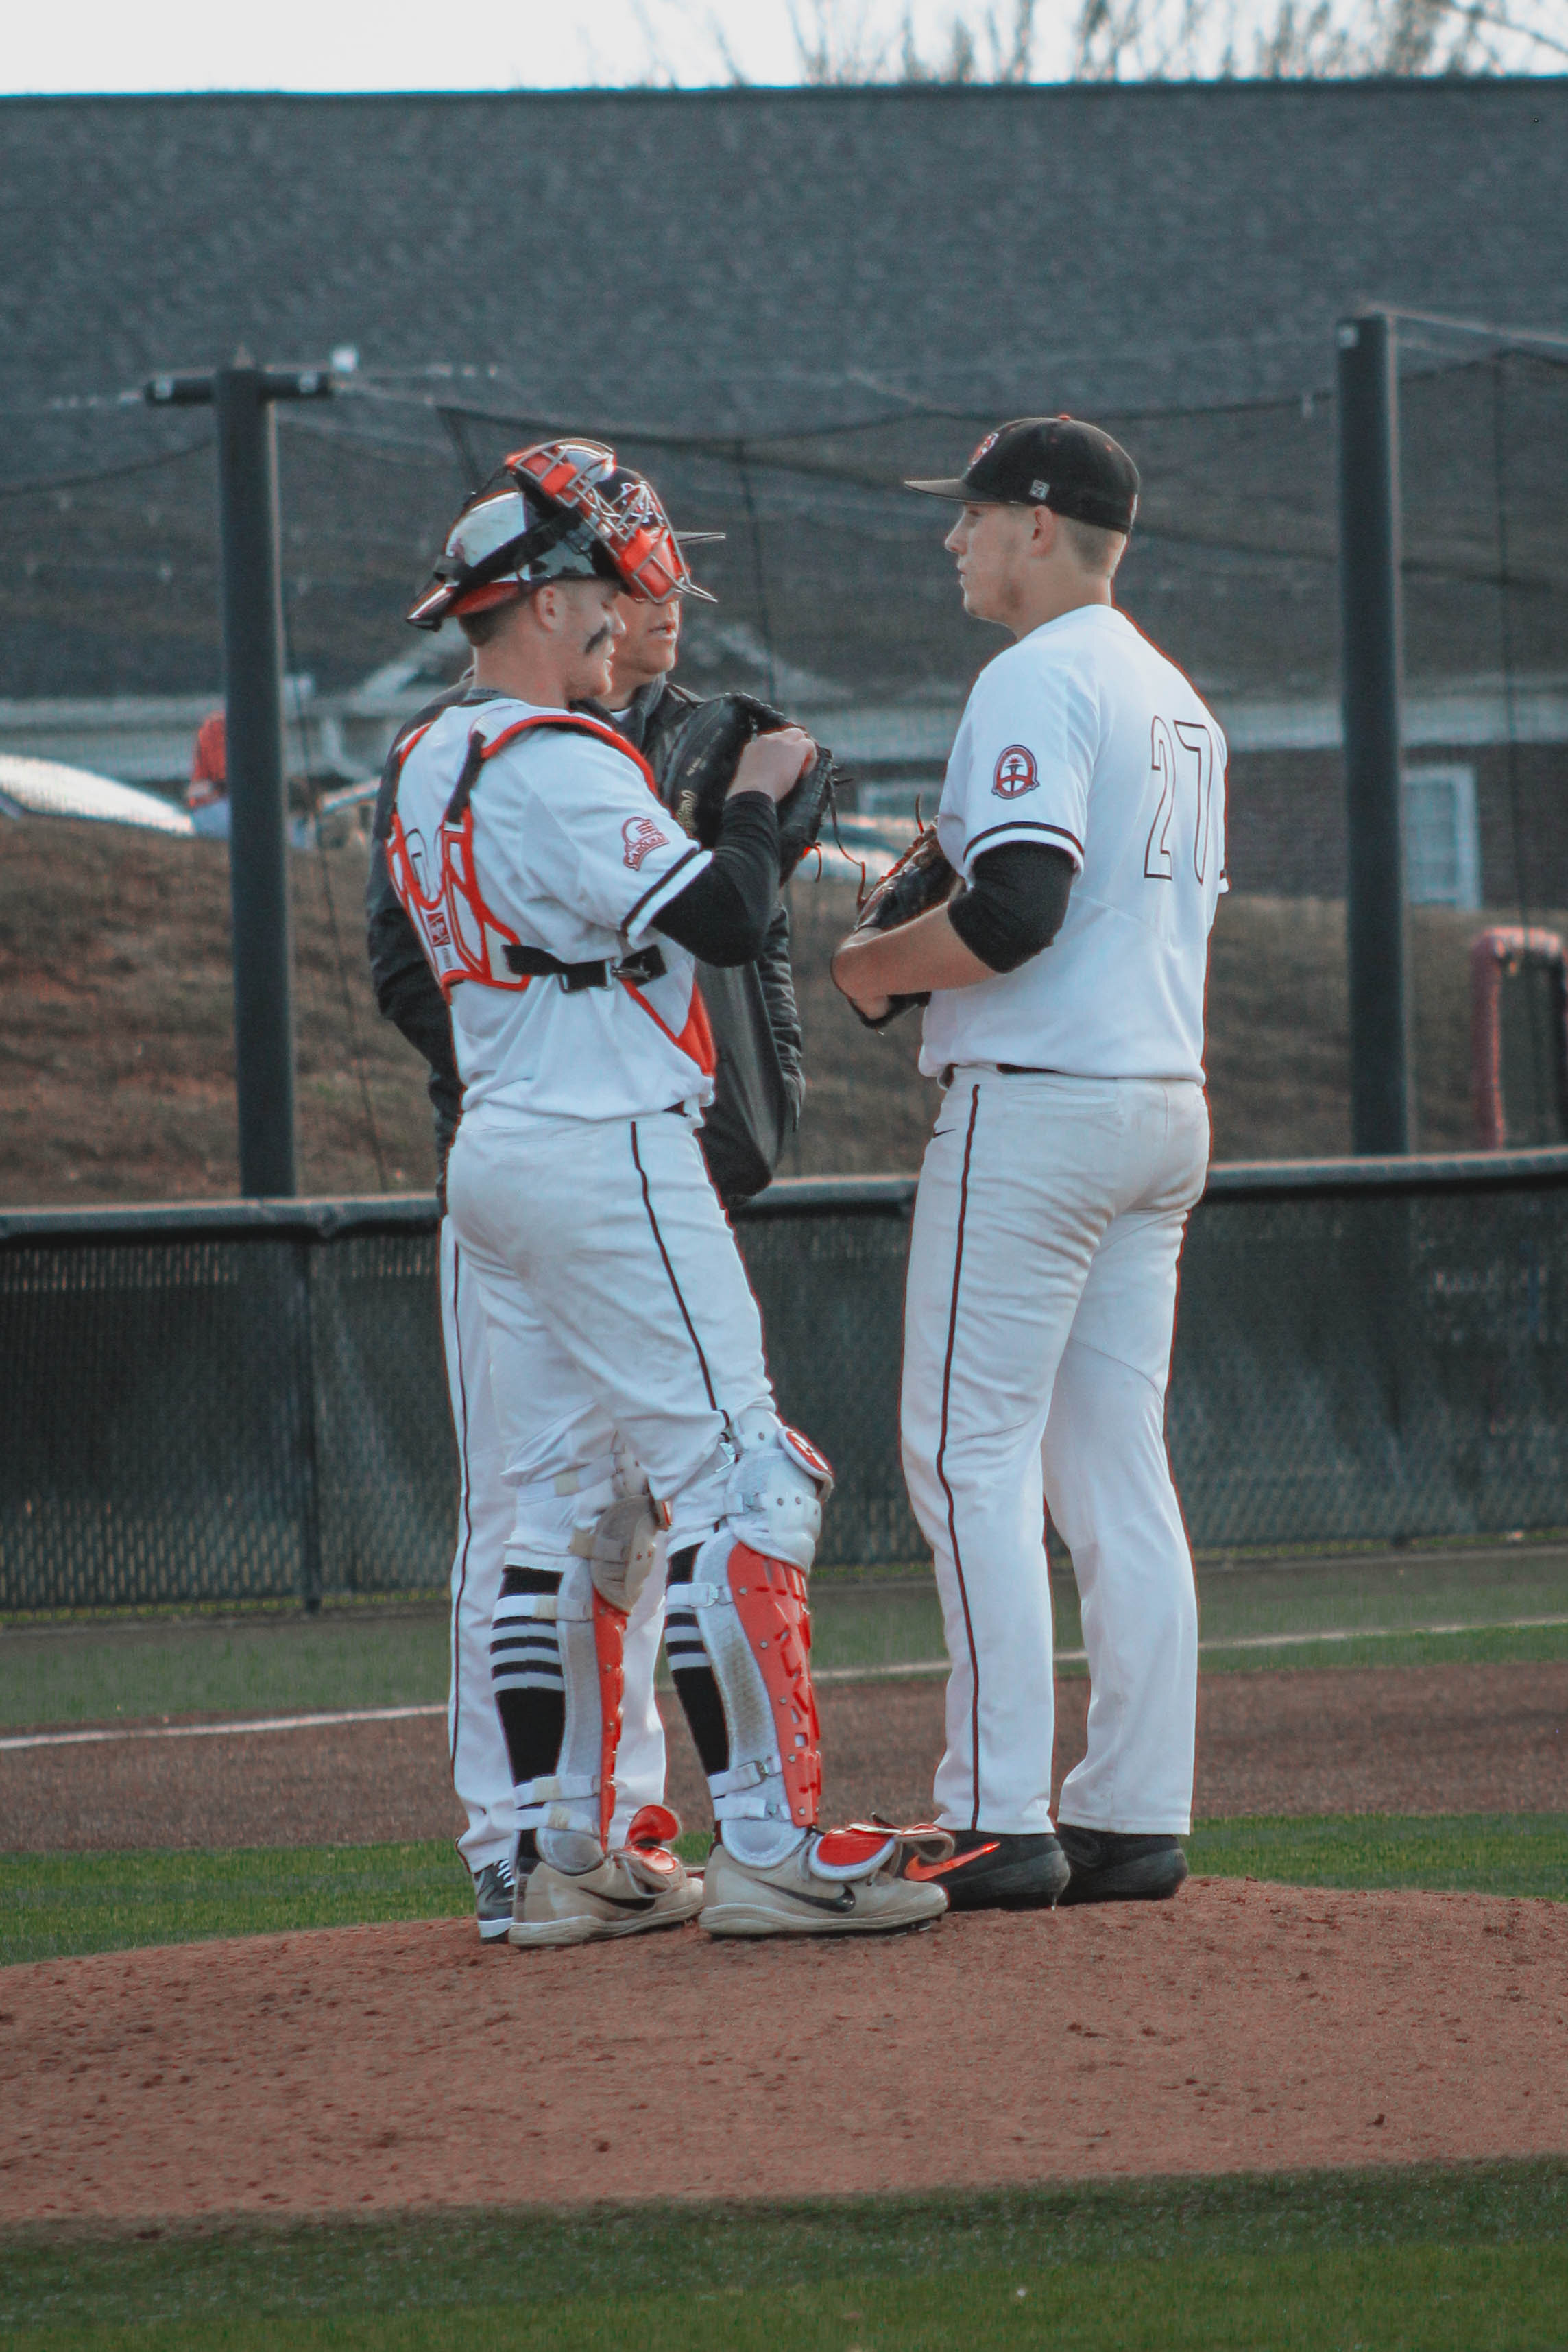 The catcher (23), pitcher (27) and a coach talk on the pitchers mound.